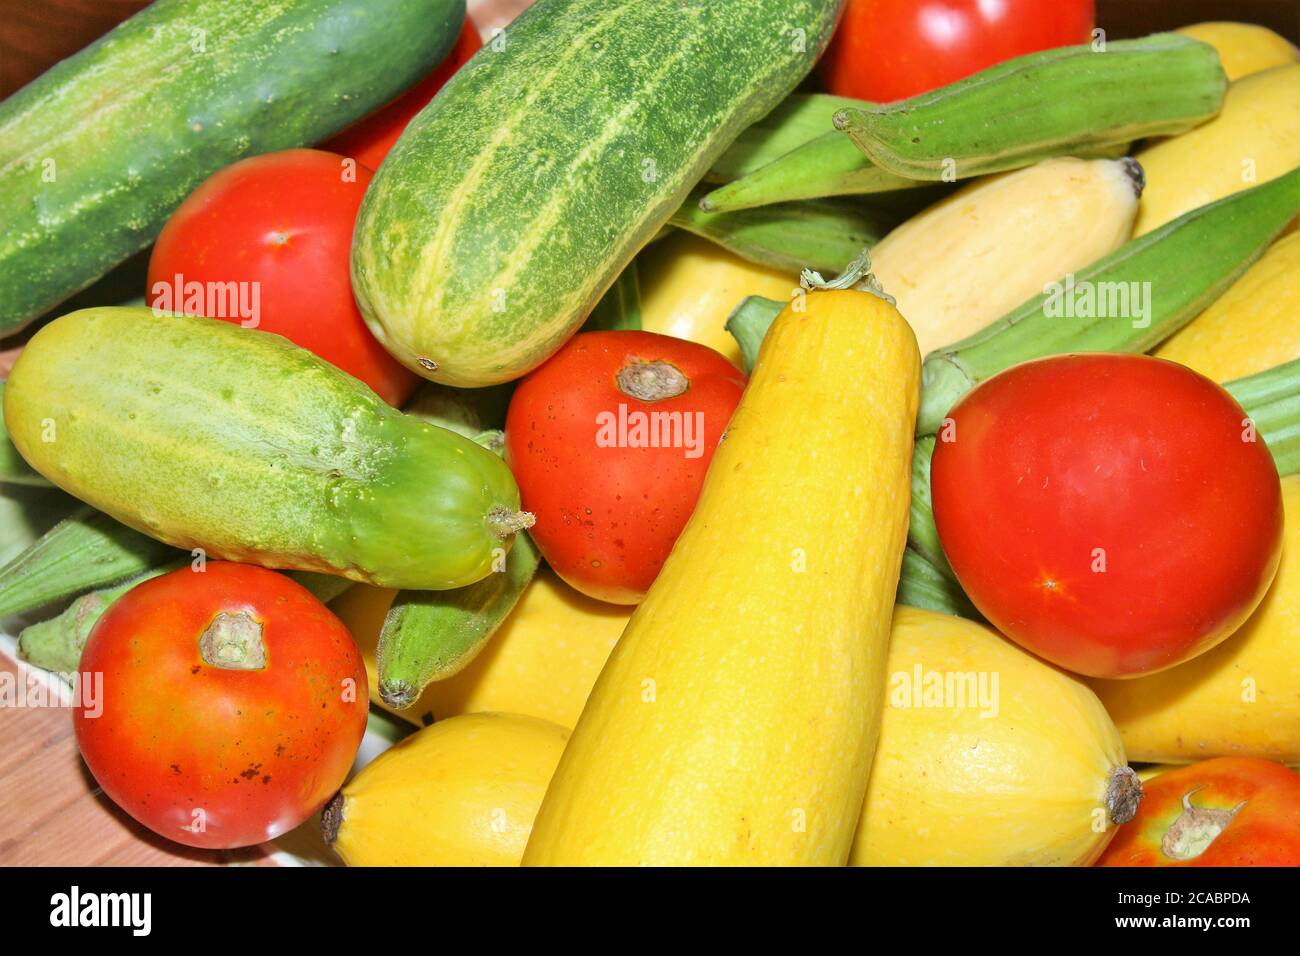 Summer vegetables, cucumbers, squash, okra and tomatoes Stock Photo